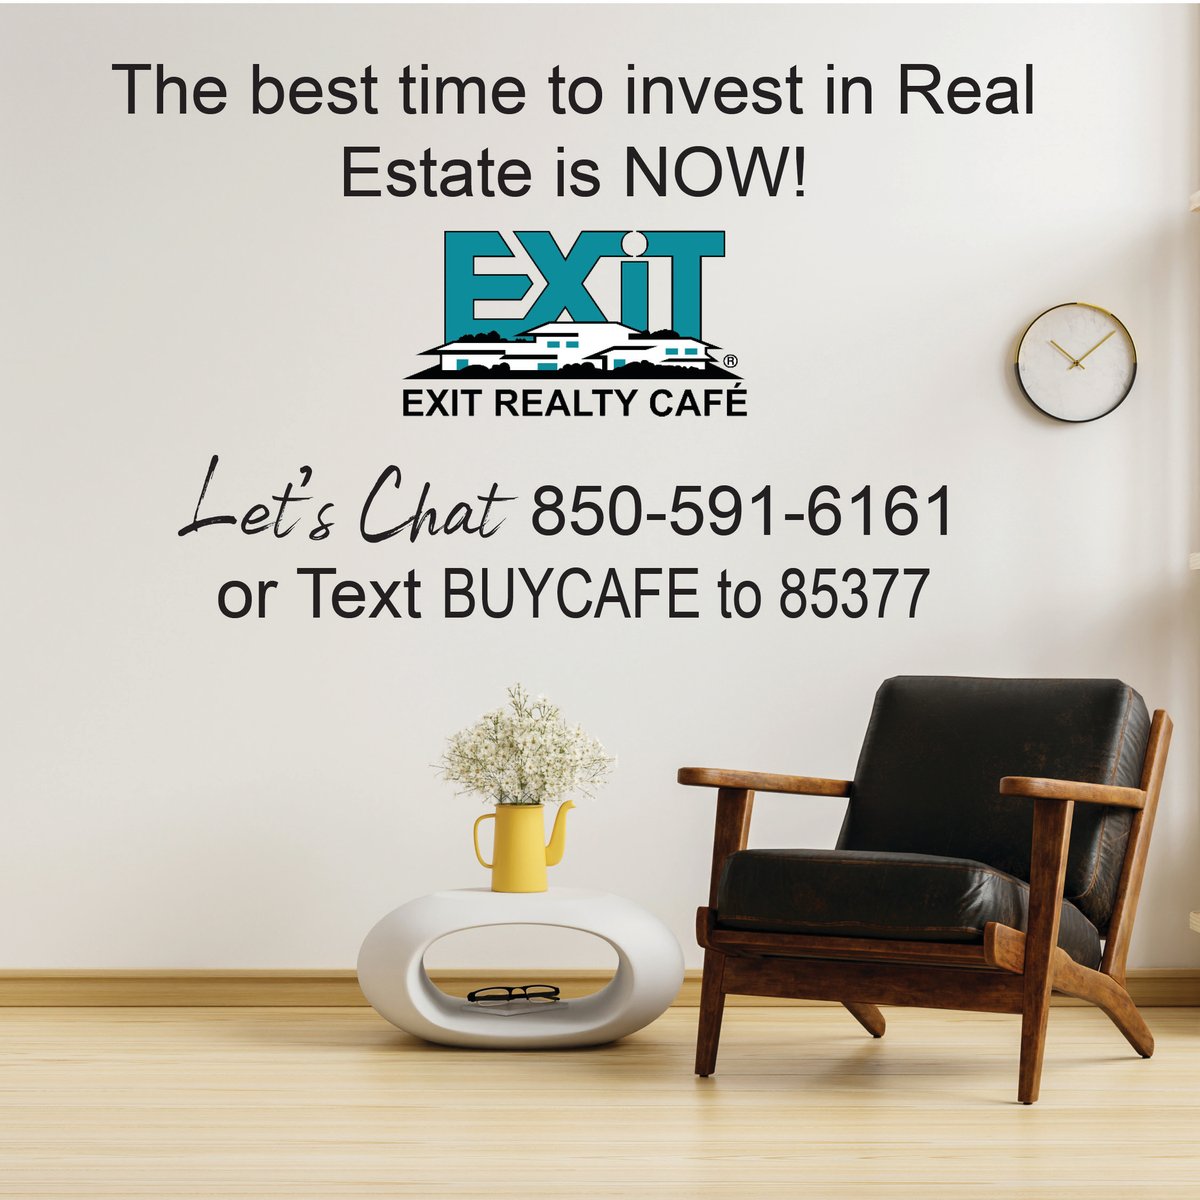 The best time to invest in real estate is NOW!

#EXITCAFE #JOINEXIT #realty #RealEstate #EXITRealty #excellence #change #growth #support #success #bestinclass #advertising #marketing #differentiator #passiveincome #financialfreedom #realestatecareers